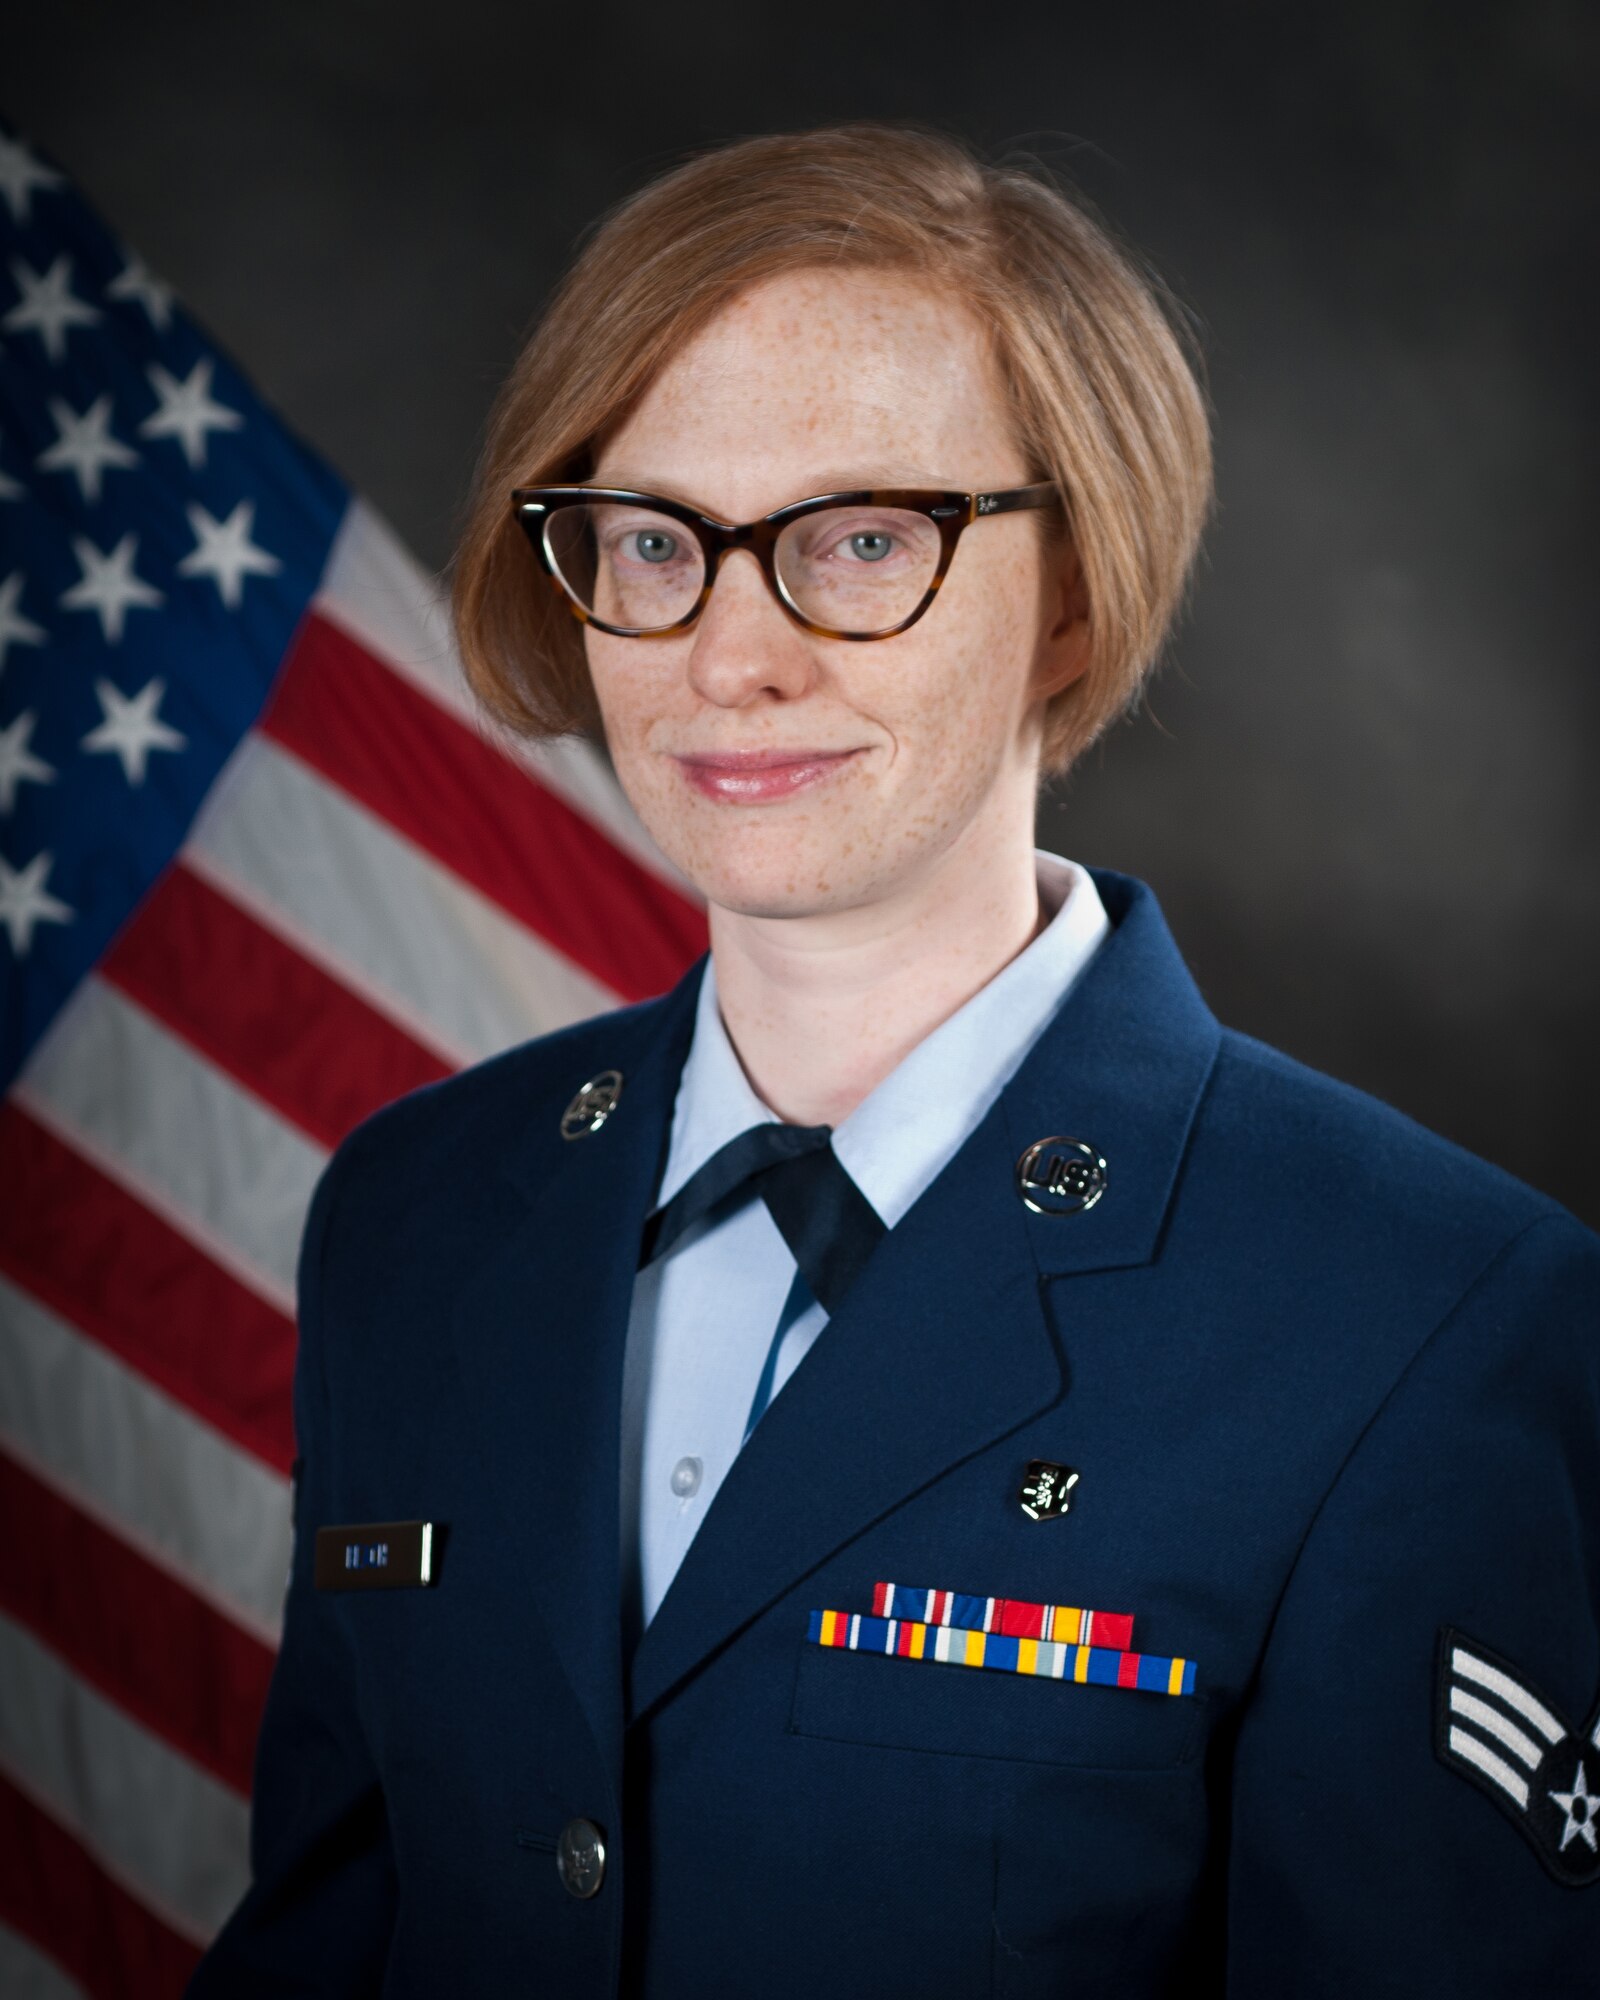 Senior Airman Katherine Beach is the Kentucky Air National Guard's 2014 Outstanding Airman of the Year in the Airman category. She will be honored during a banquet to be held March 22, 2014, at the Kentucky Fair and Exposition Center. (U.S. Air National Guard photo by Master Sgt. Philip Speck)